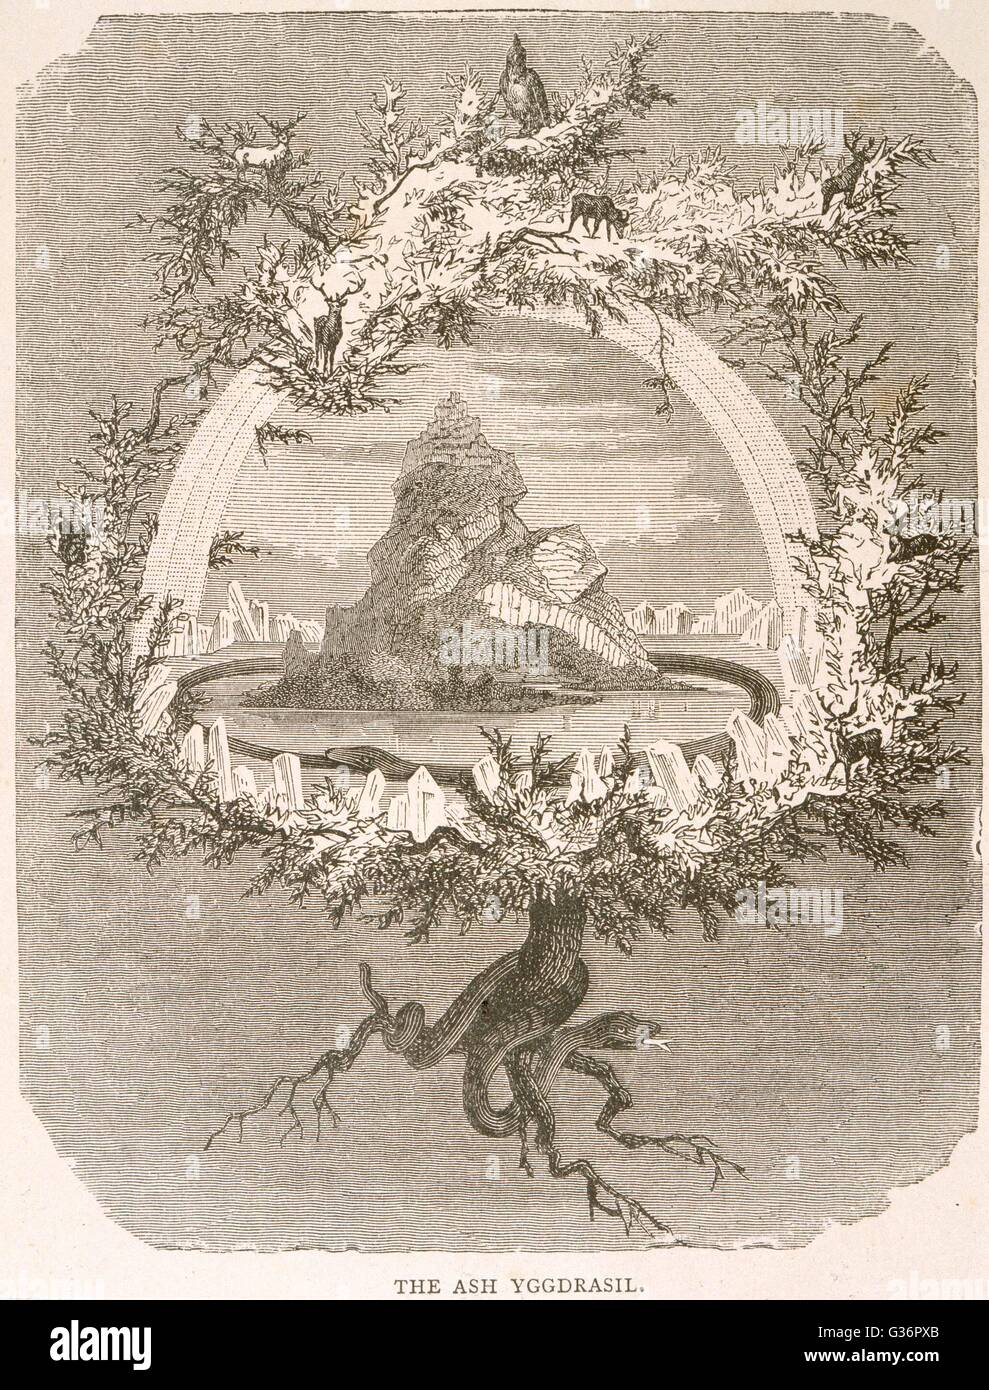 Yggdrasil (Yggdrasill), the sacred ash, the Tree of Life, the Mundane Tree of Norse mythology, whose branches overhang the Universe.      Date: 1886 Stock Photo